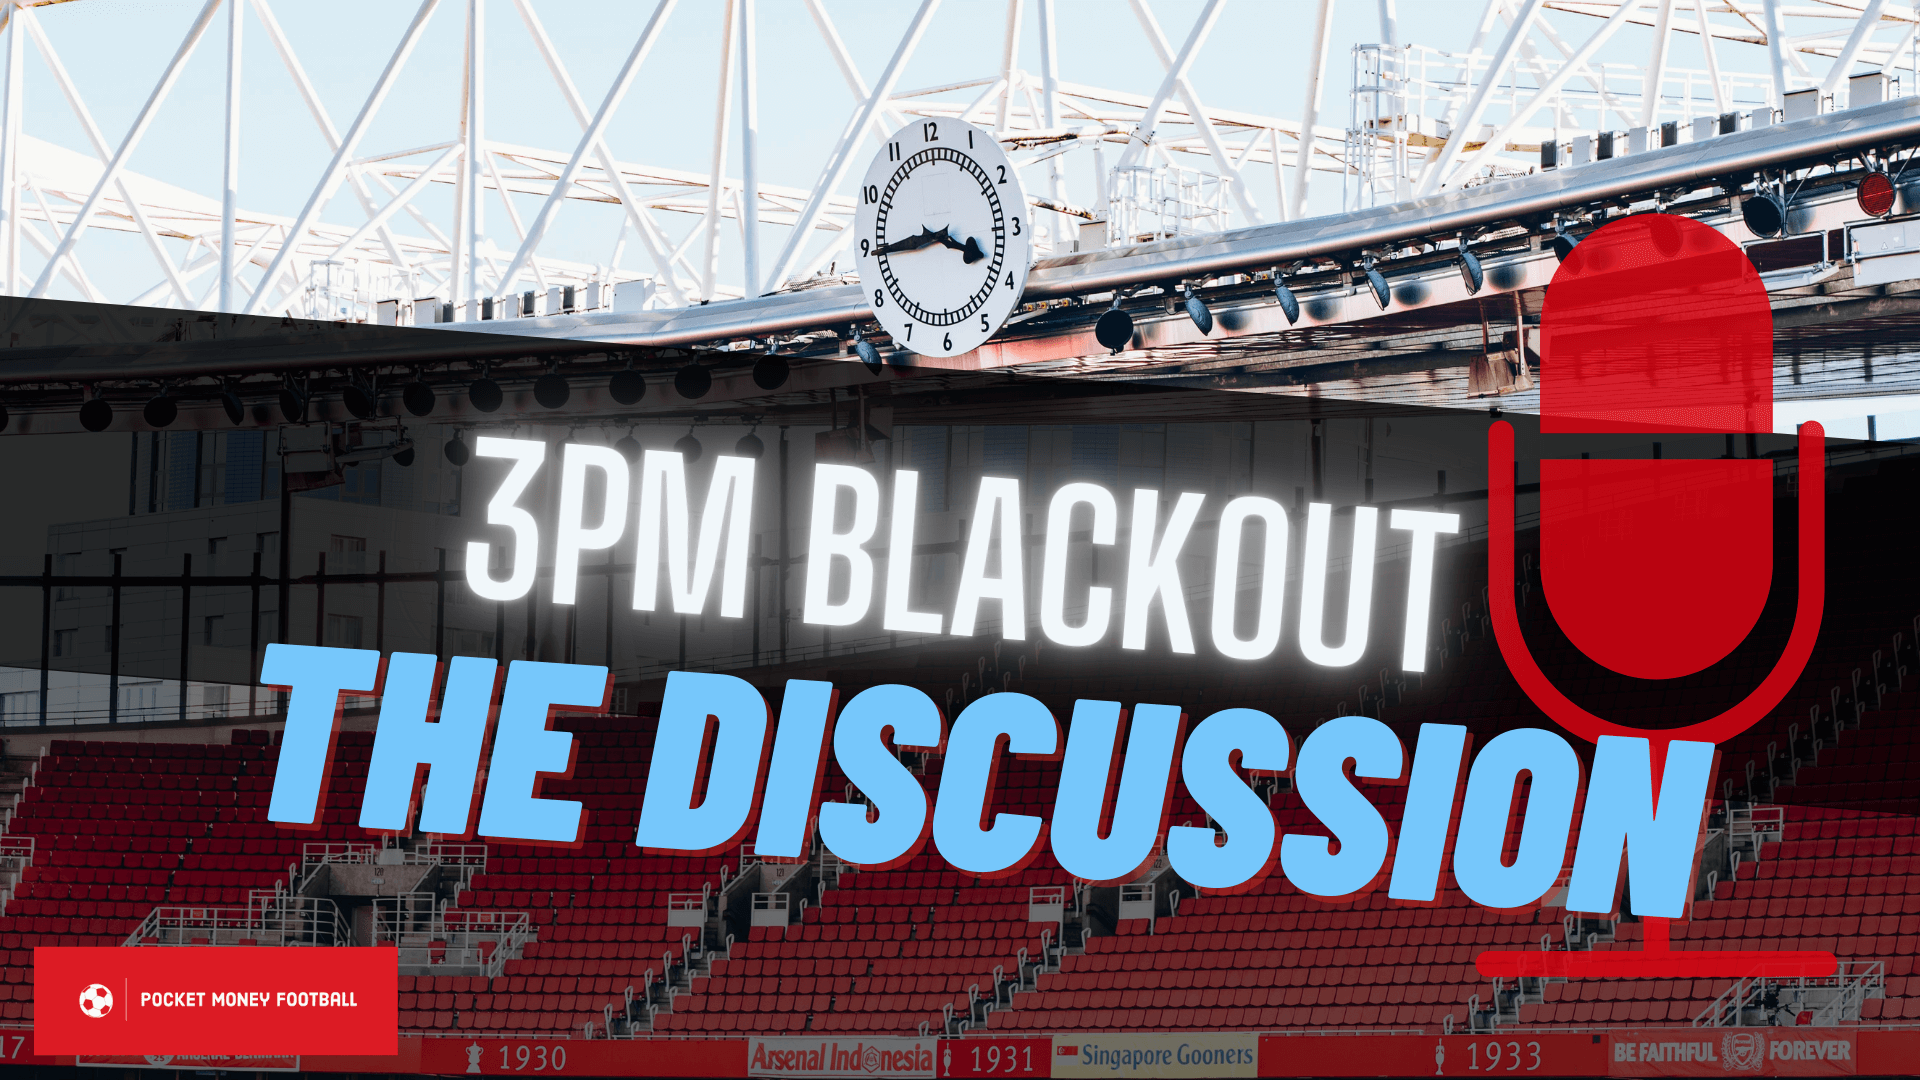 3pm Blackout: The Discussion on Pocket Money Football